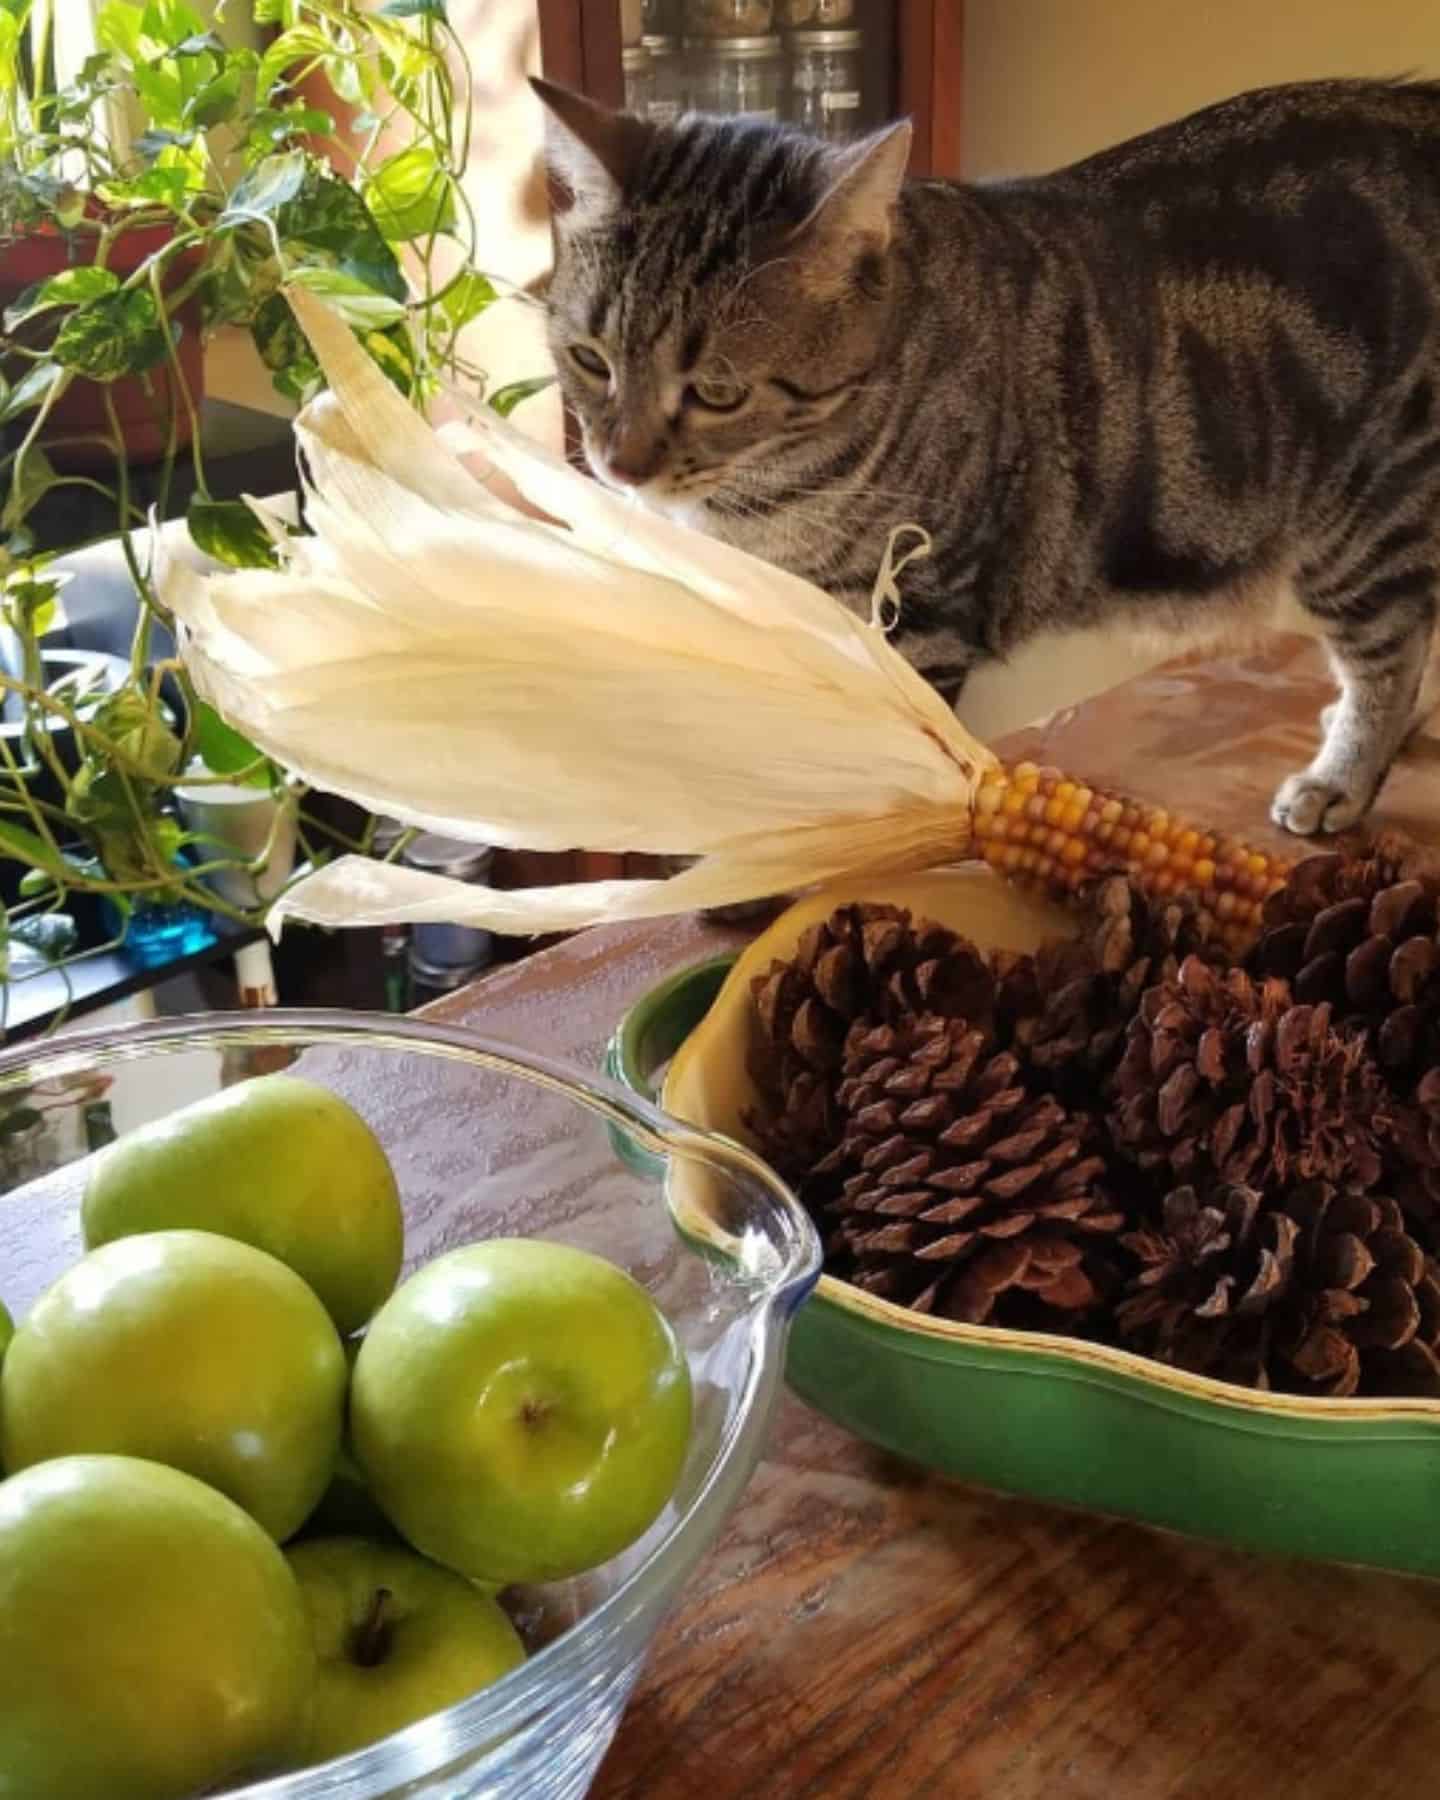 the cat sniffs the table